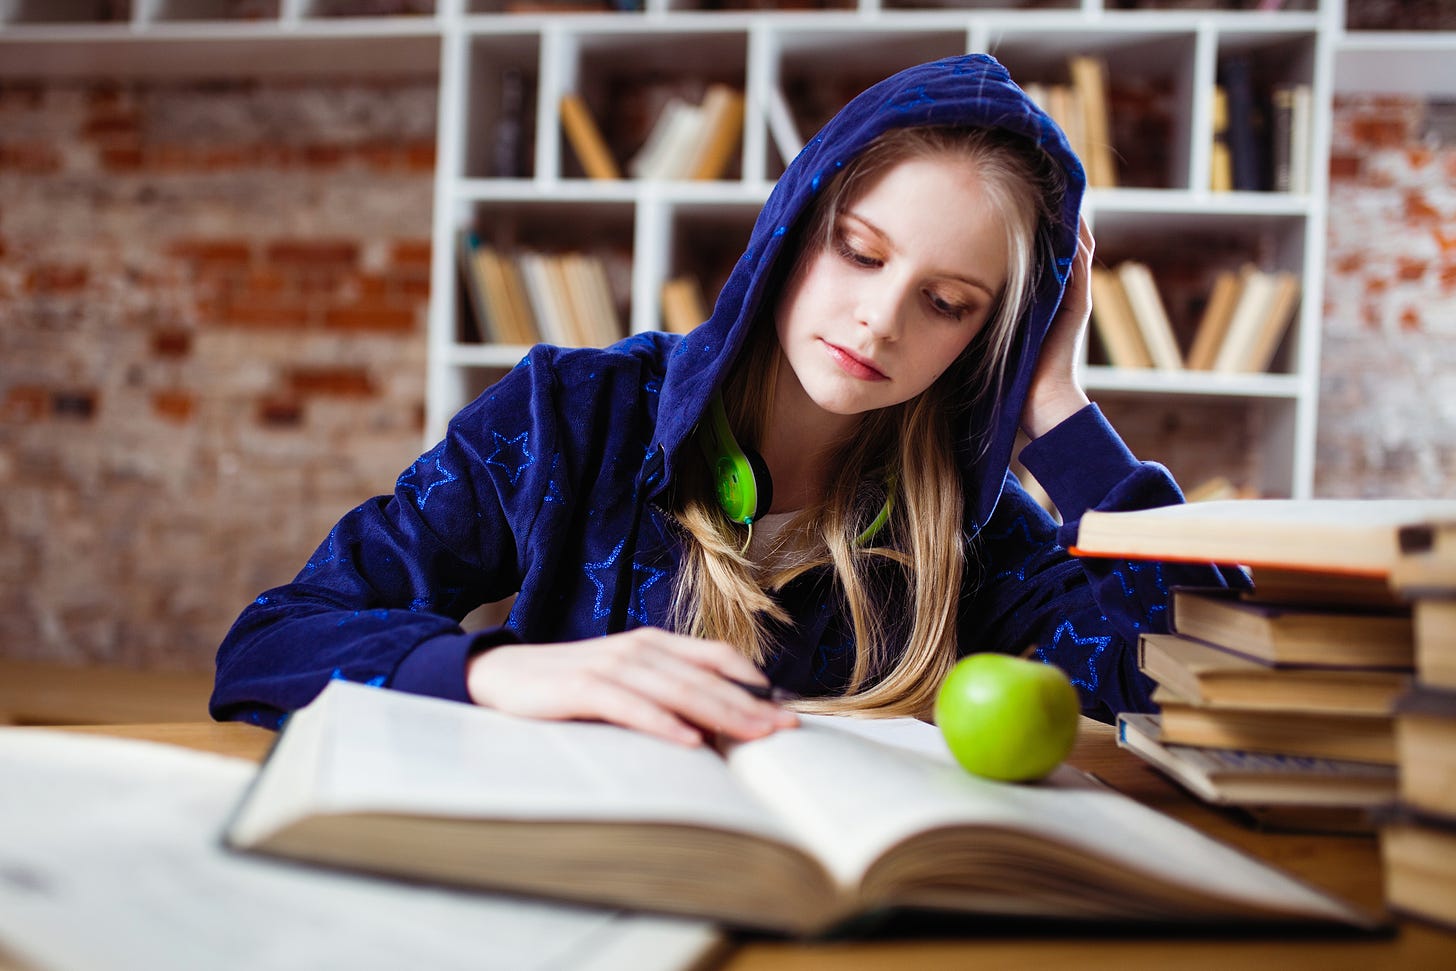 Blonde haird girl wearing a blue hoodie studying.